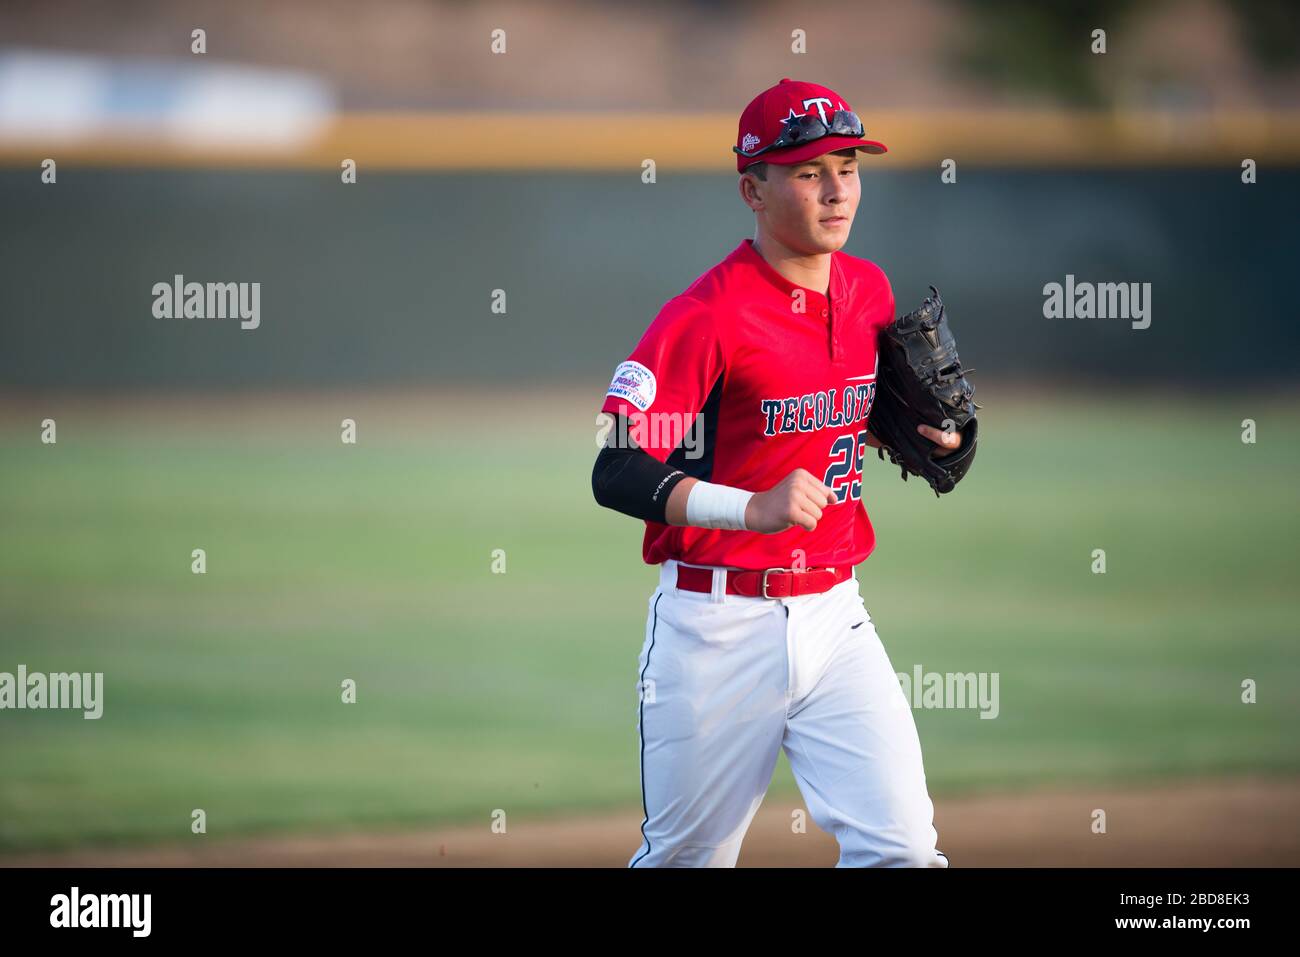 Teen baseball player in red uniform jogging off the field Stock Photo